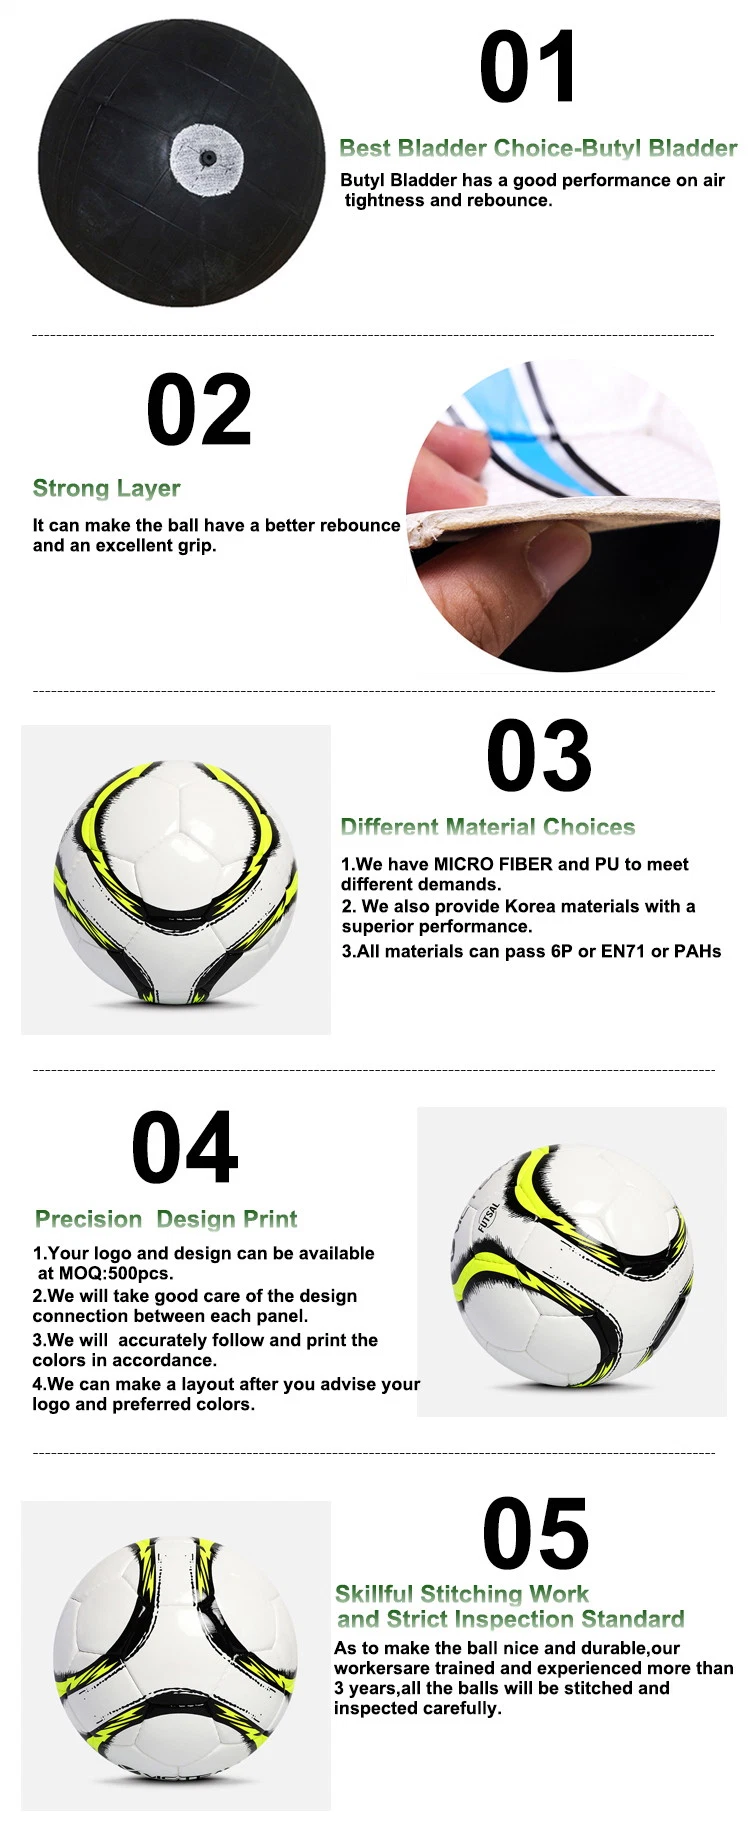 Professional PU Material Match Indoor Soccer Ball